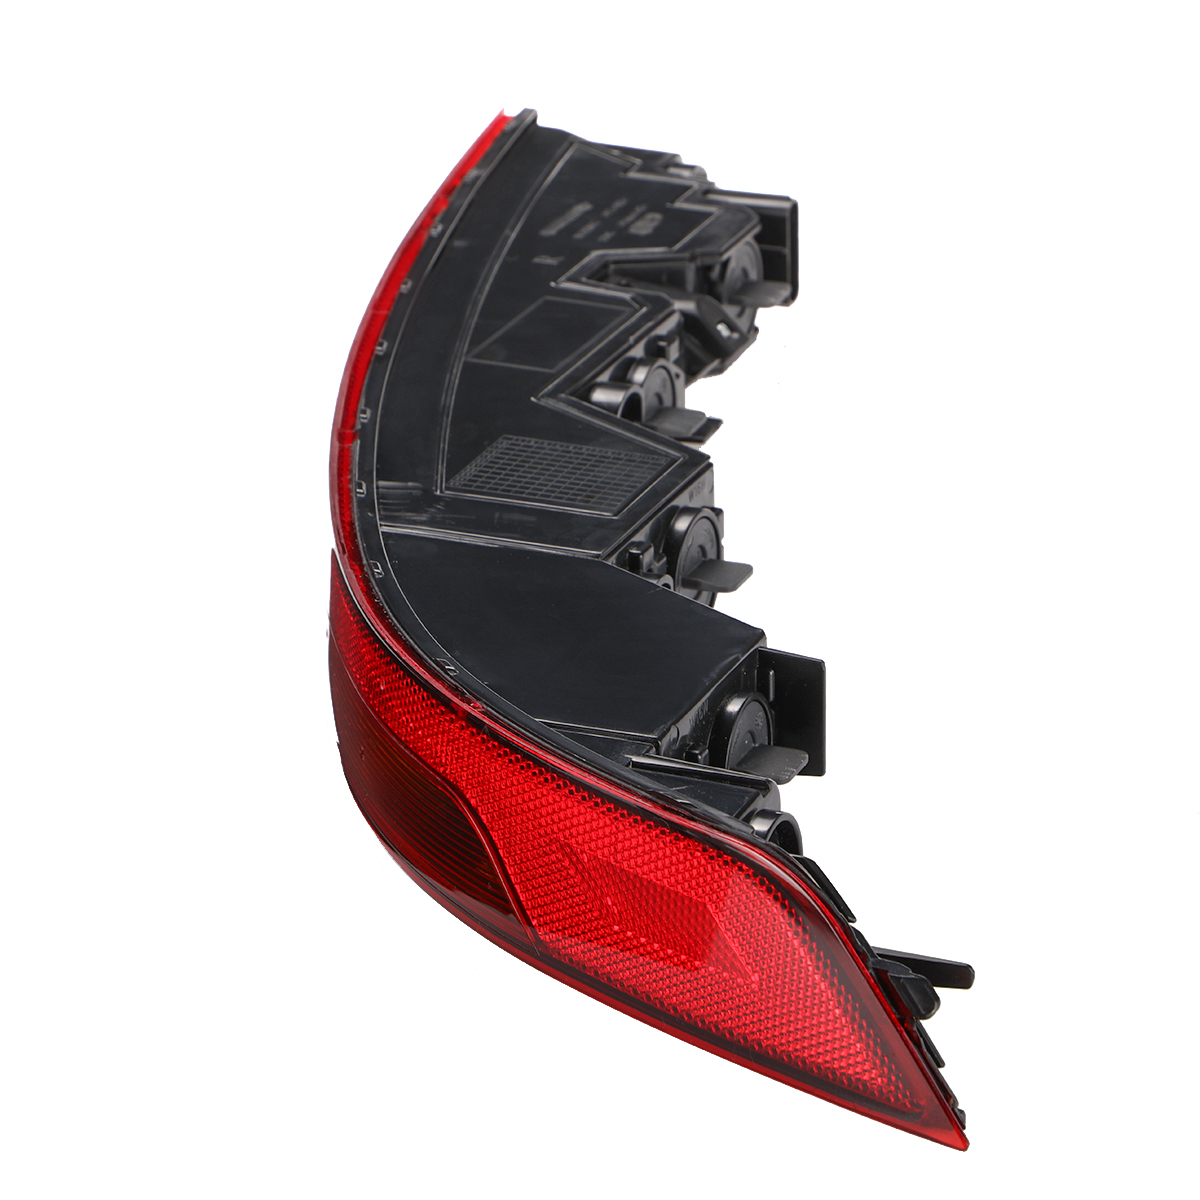 Find For AUDI Q5 2018 2021 RH Right Side Rear Bumper Reflector Fog Brake Lights for Sale on Gipsybee.com with cryptocurrencies